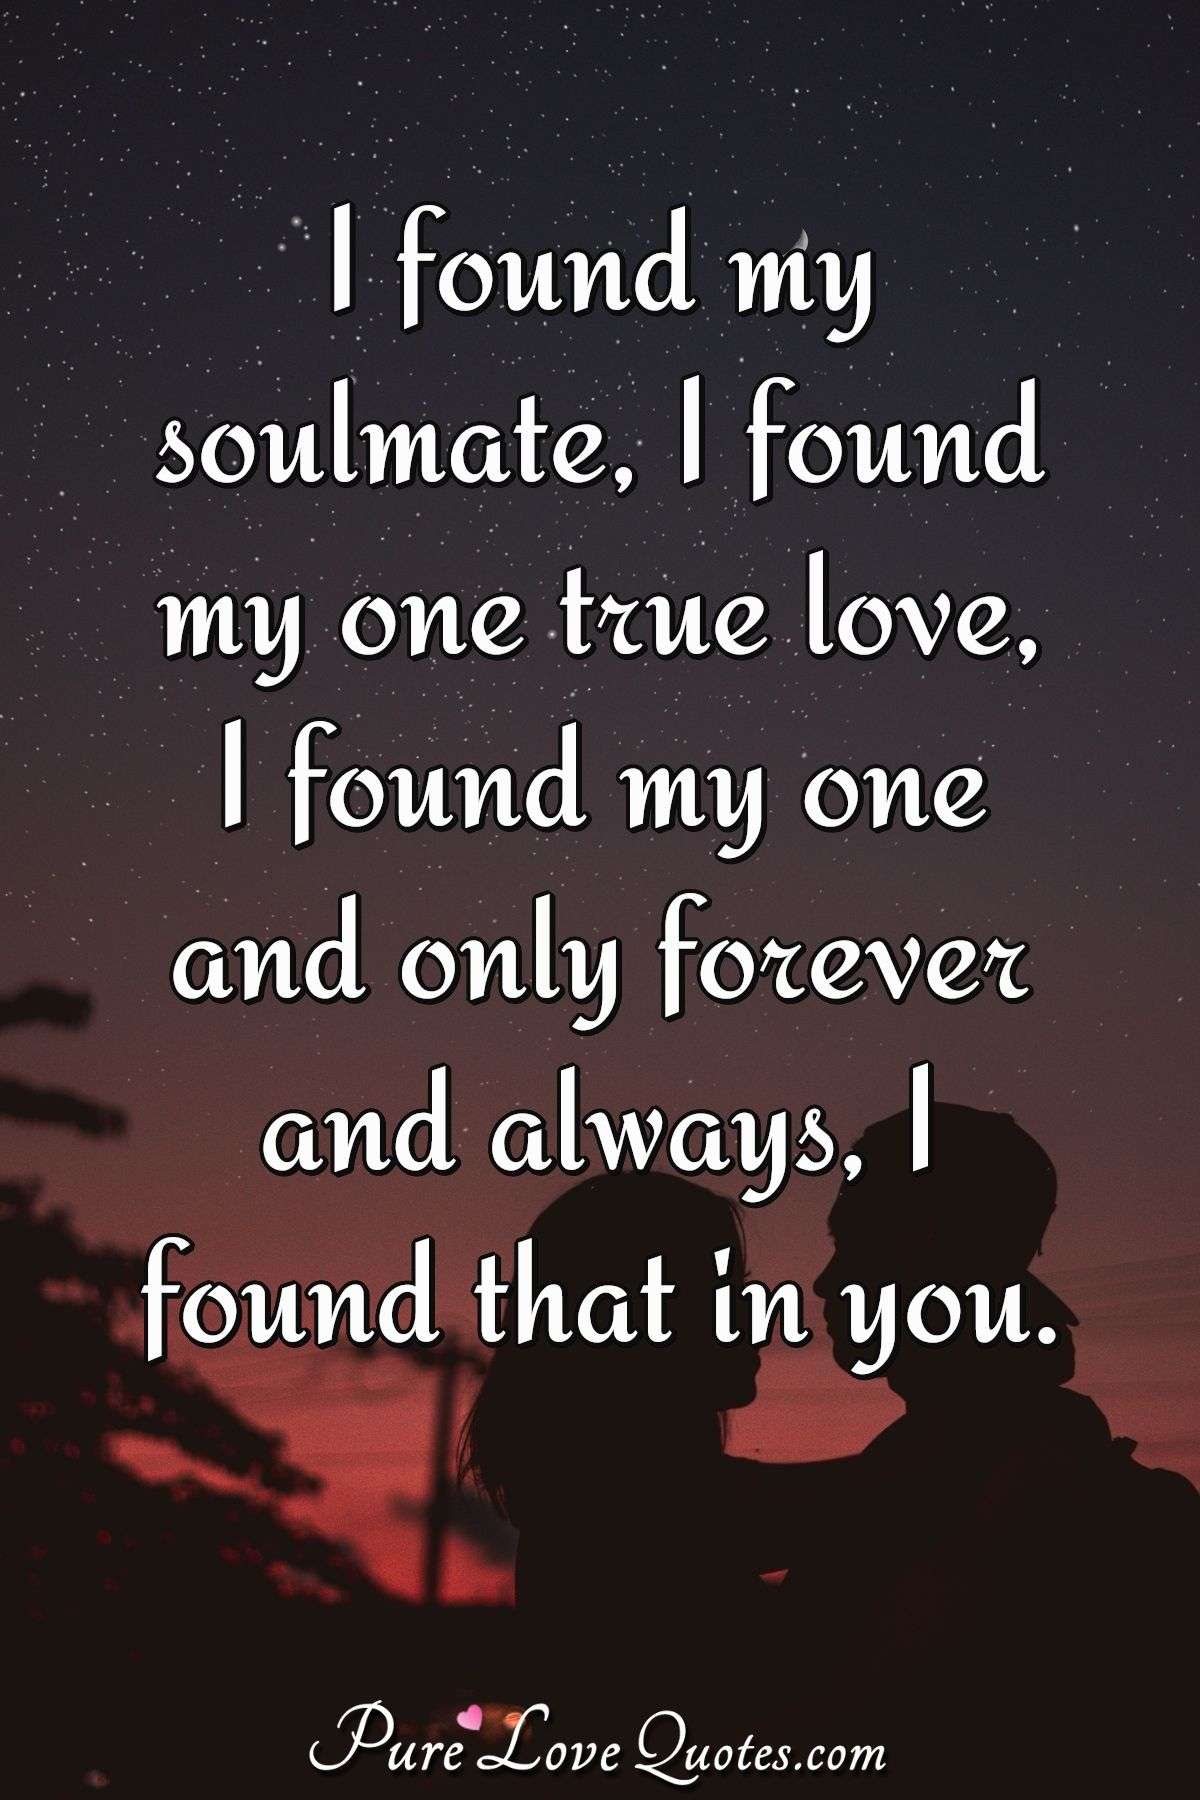 I found my soulmate, I found my one true love, I found my one and only forever and always, I found that in you. - Anonymous